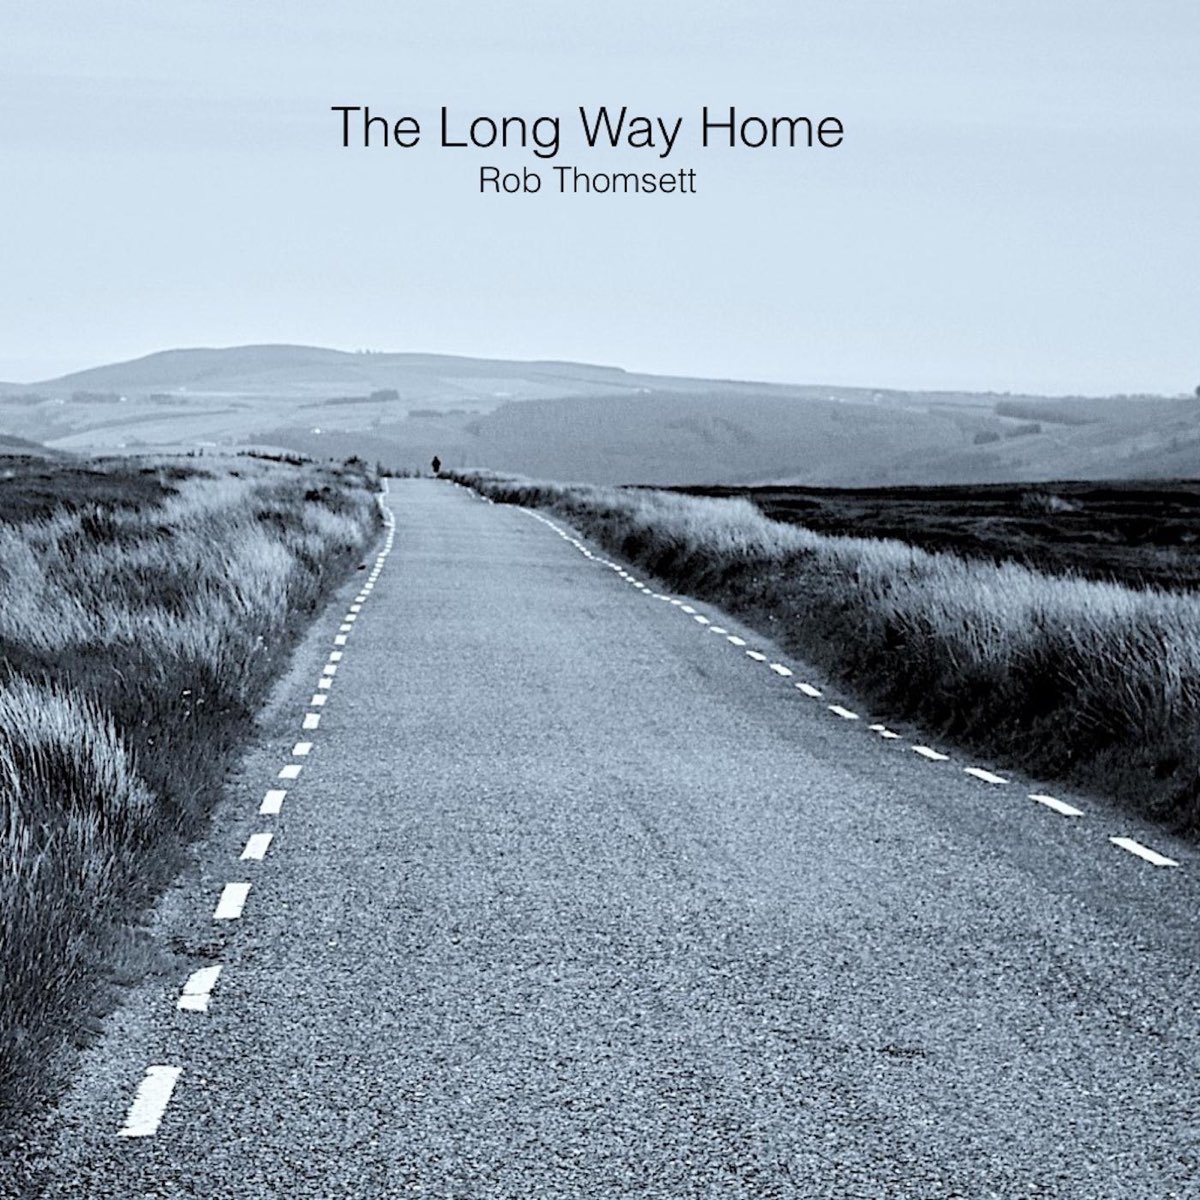 This long way. Long way Home. The way Home. On the way Home. Bg long way Home.